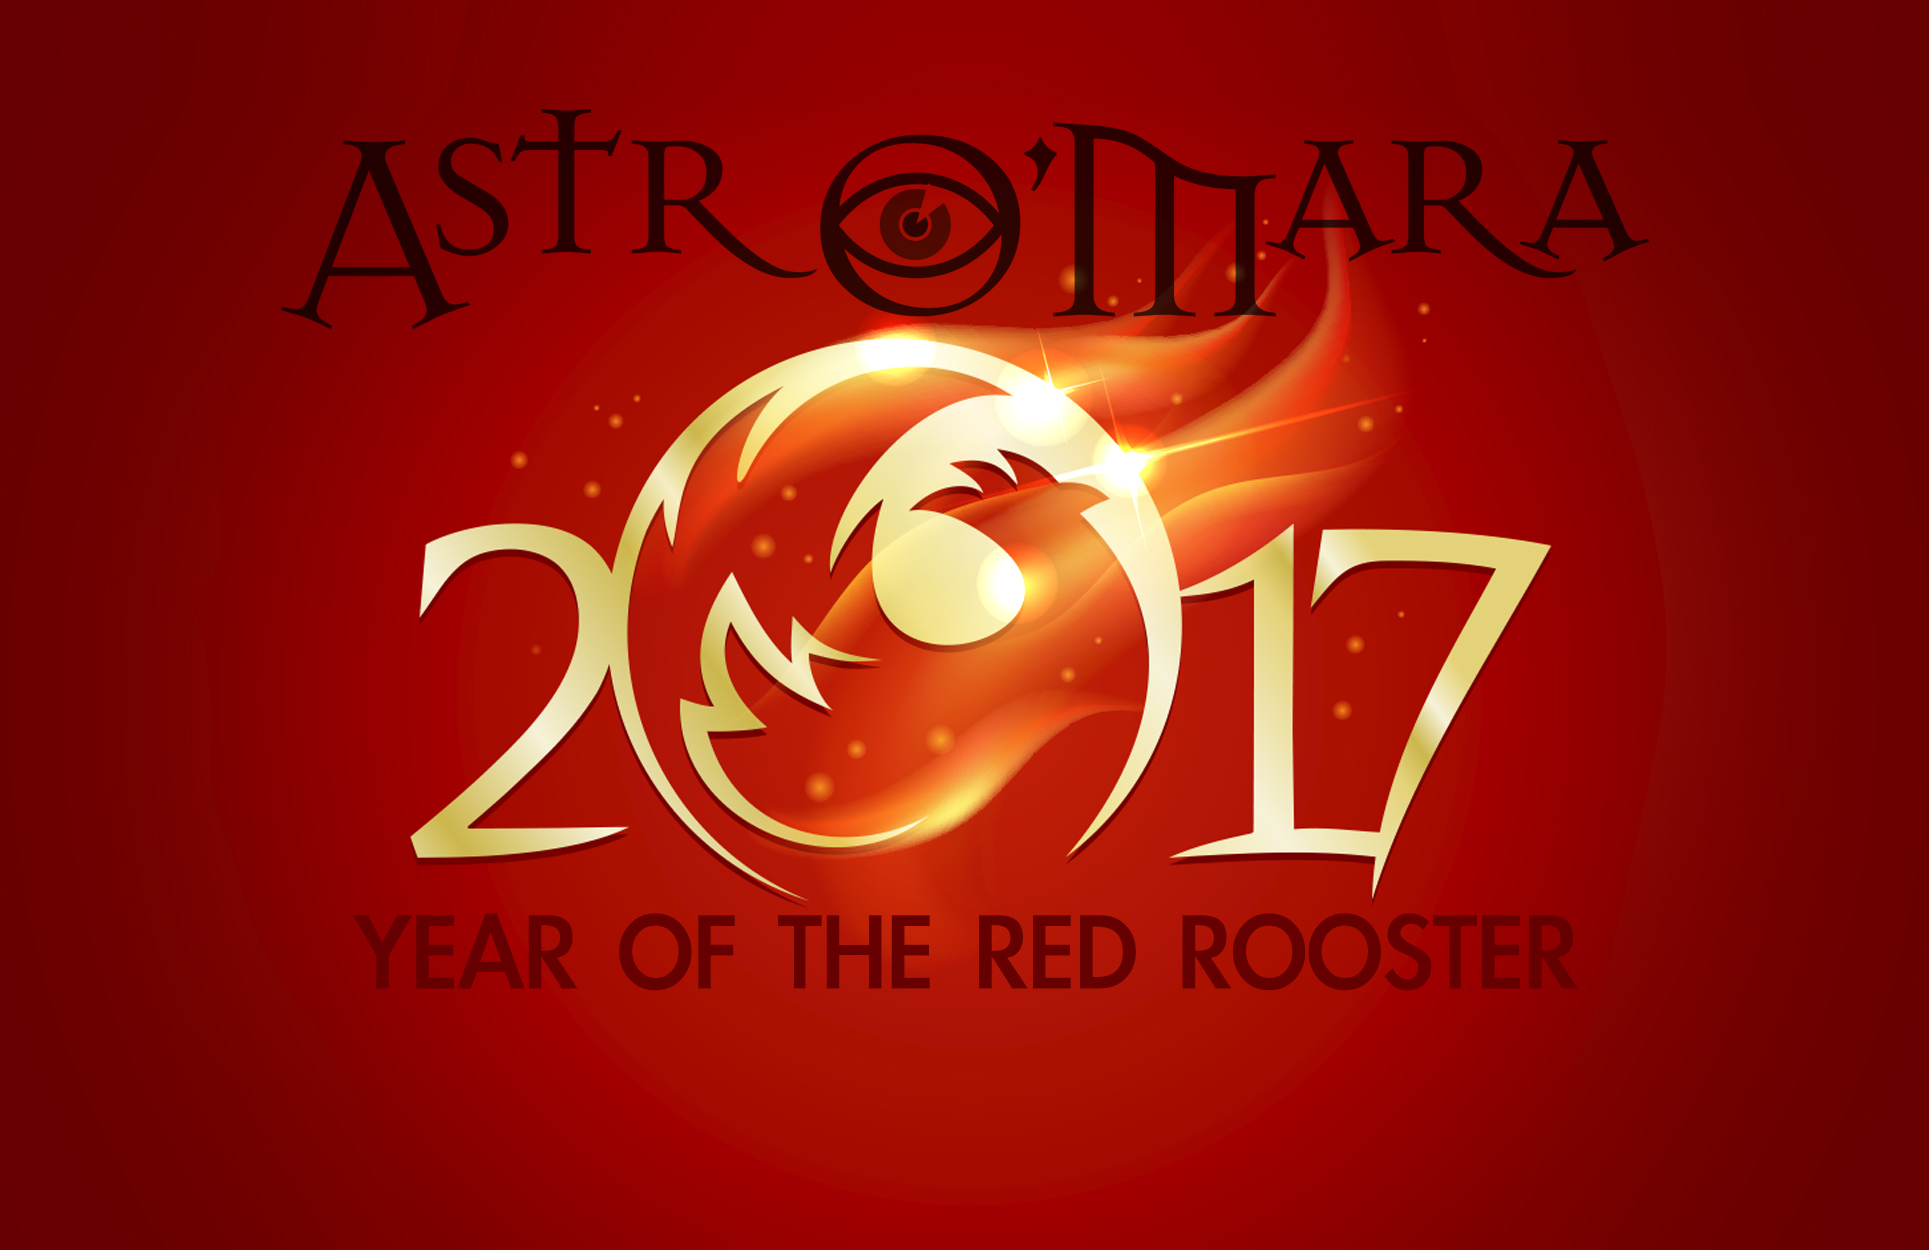 CHINESE HOROSCOPE 2017 – YEAR OF THE FIRE ROOSTER